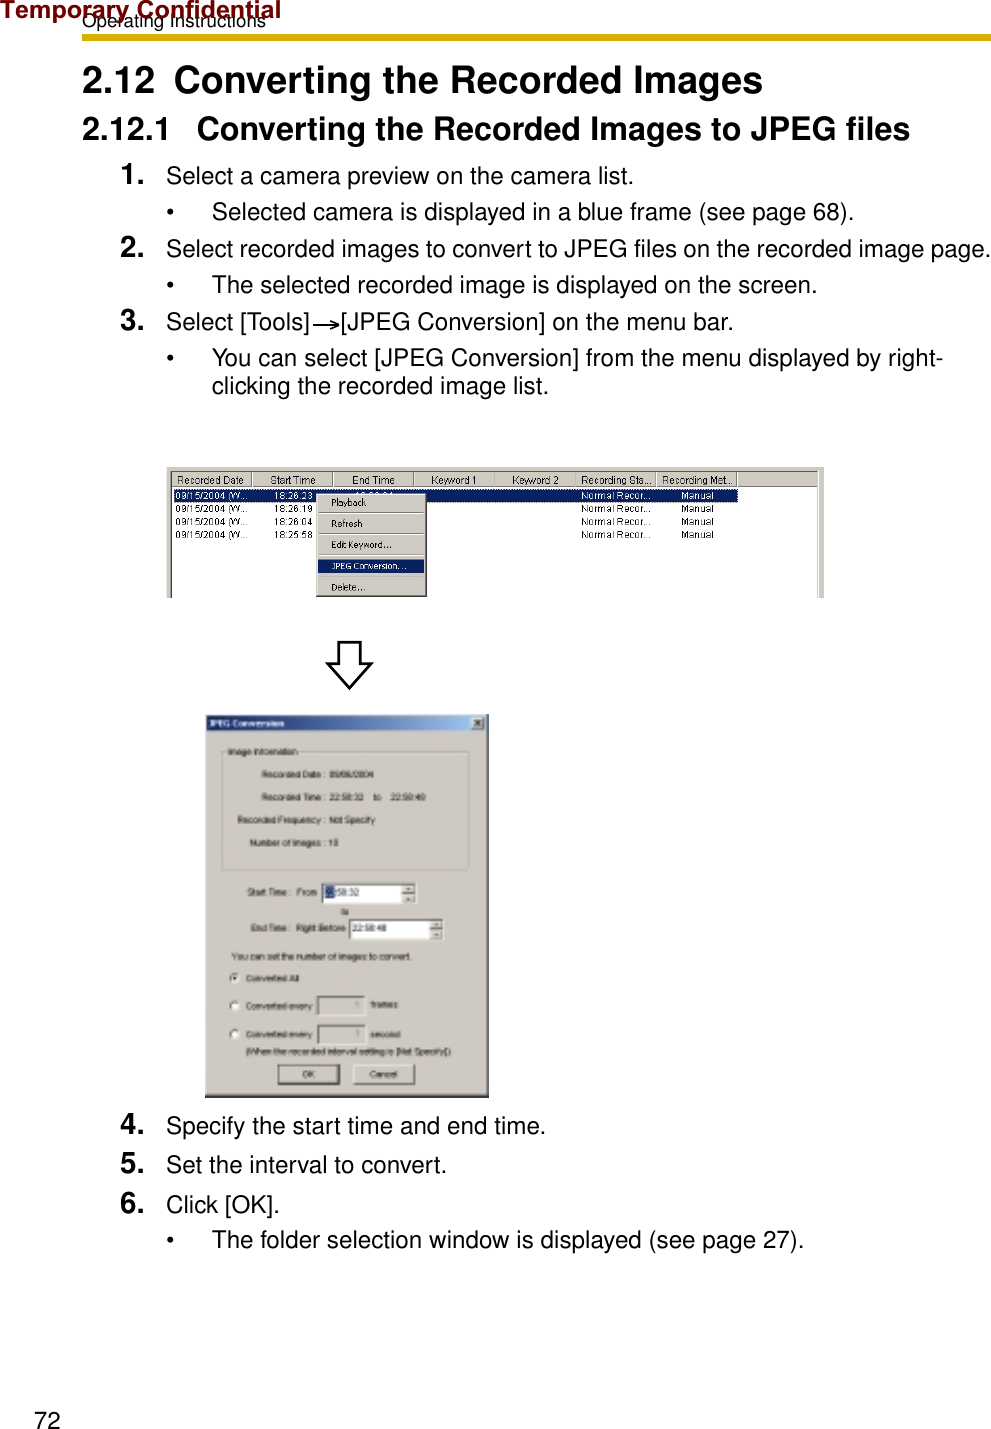 Operating Instructions722.12 Converting the Recorded Images2.12.1 Converting the Recorded Images to JPEG files1. Select a camera preview on the camera list.• Selected camera is displayed in a blue frame (see page 68).2. Select recorded images to convert to JPEG files on the recorded image page.• The selected recorded image is displayed on the screen.3. Select [Tools] [JPEG Conversion] on the menu bar.• You can select [JPEG Conversion] from the menu displayed by right-clicking the recorded image list.4. Specify the start time and end time.5. Set the interval to convert.6. Click [OK].• The folder selection window is displayed (see page 27).Temporary Confidential